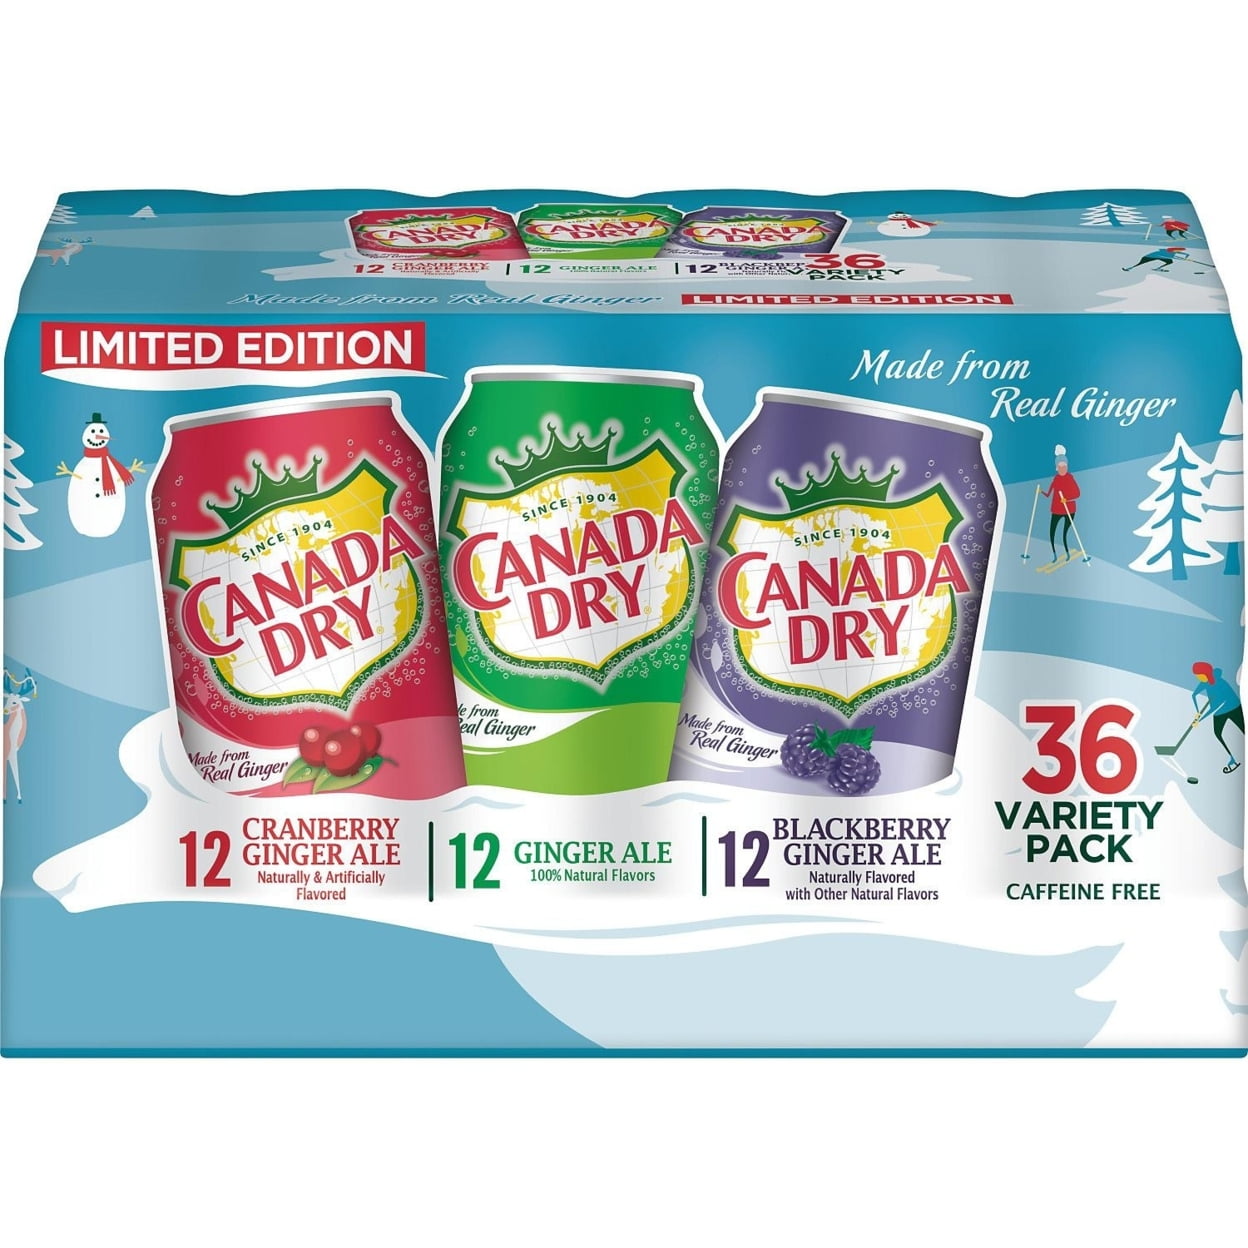 Canada Dry Ginger Ale Winter Variety Pack - 12 fl oz